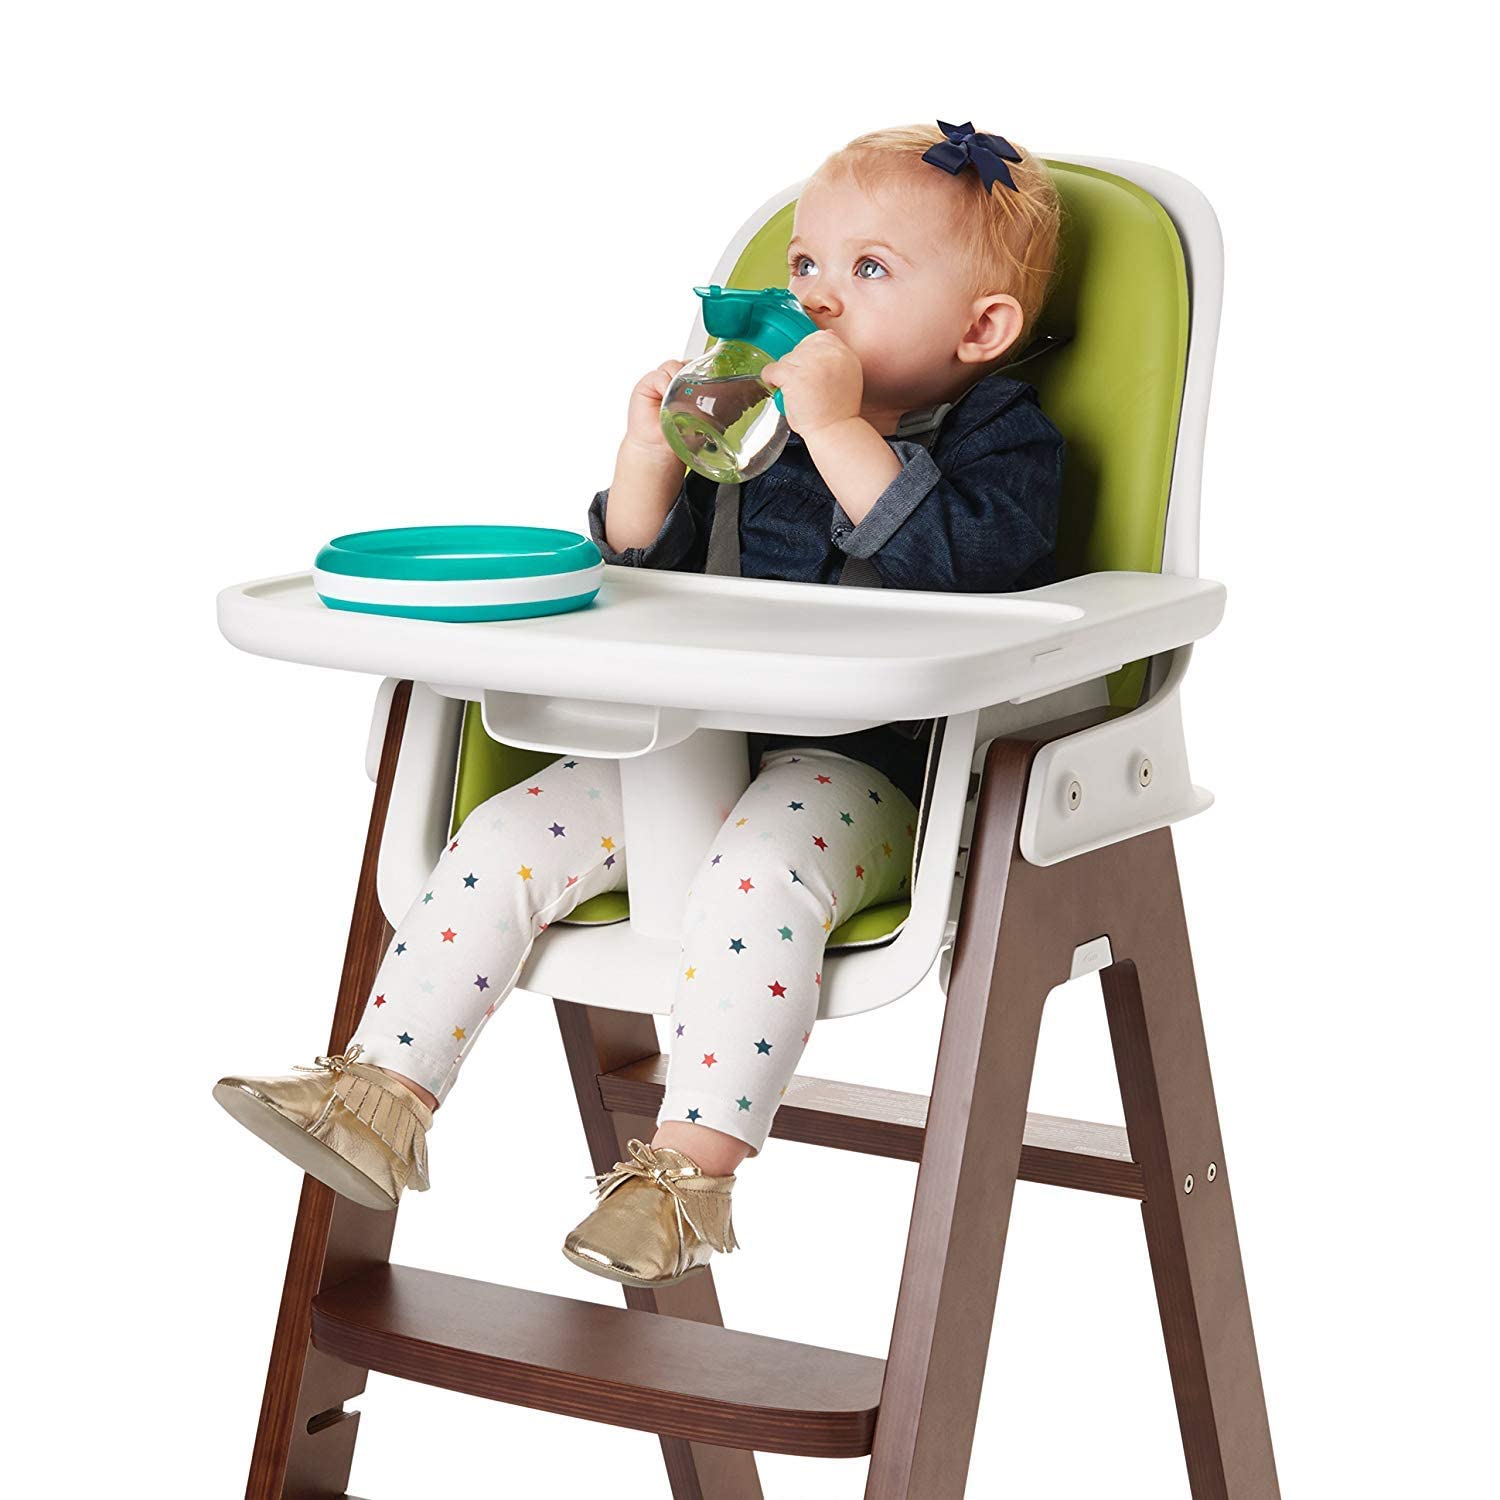 OXO Tot Transitions Soft Spout Sippy Cup with Removable Handles, Teal, 6 Ounce (2 Pack)